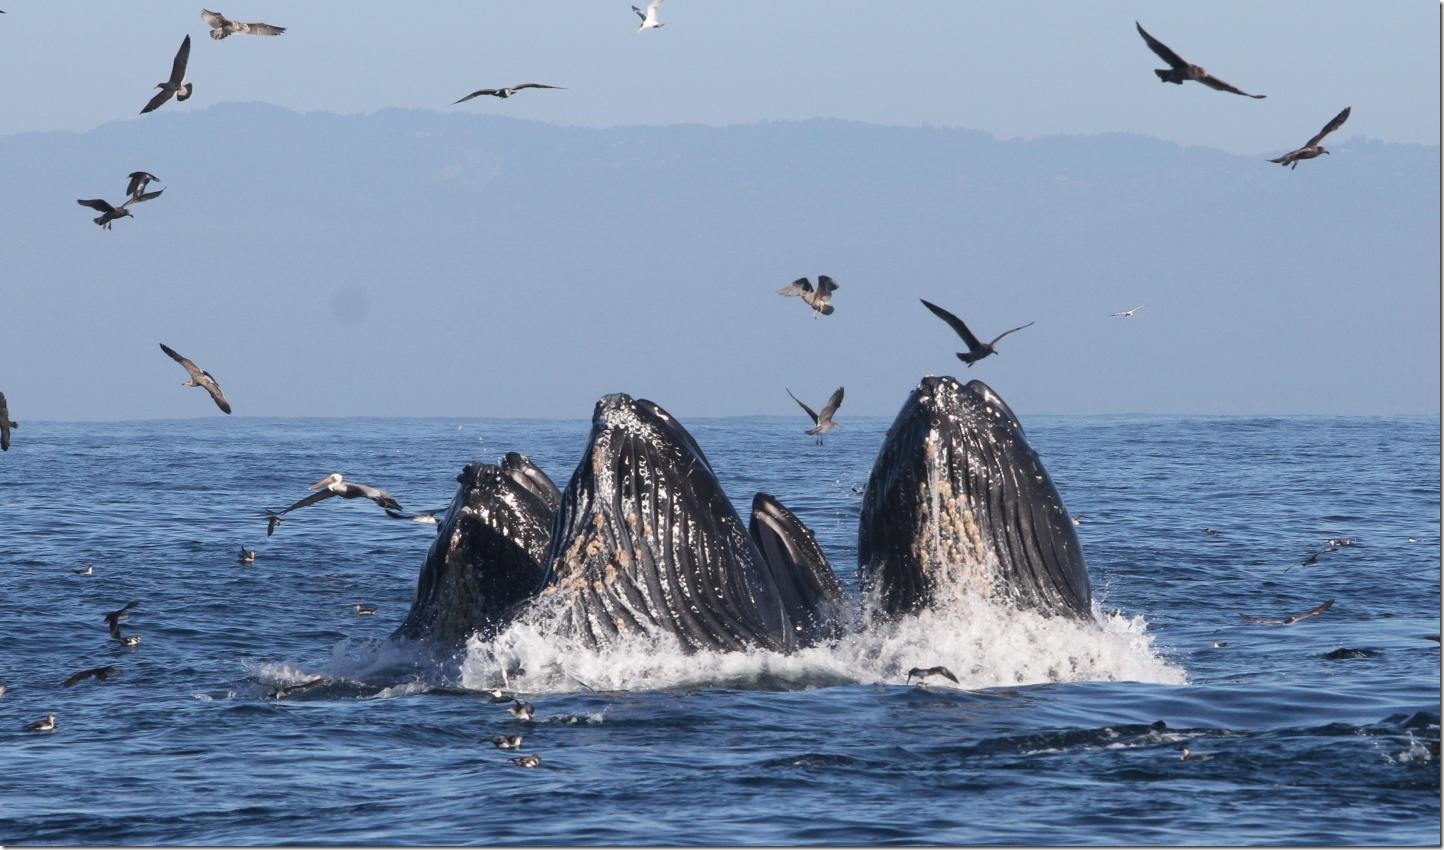 Humpback whales feed on anchovy off the Coast of California. New research shows that warm ocean temperatures pushed whales into the same water as crab fishermen, and whale entanglements increased. Credit: John Calambokidis/Cascadia Research Collective